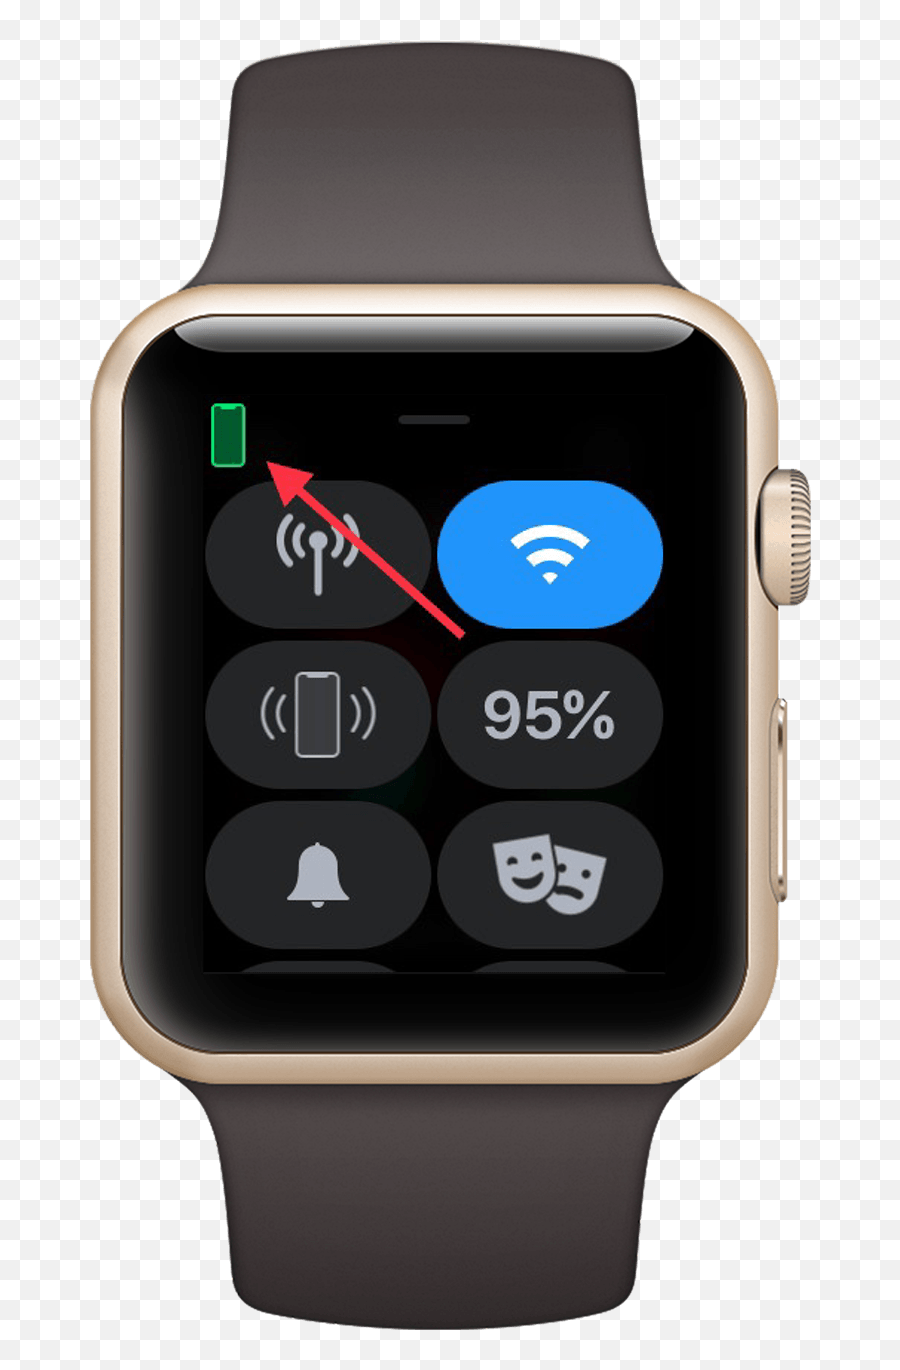 Fix Iphone With Apple Watch - Pink Apple Watch Black Strap Png,Green Phone Icon On Apple Watch